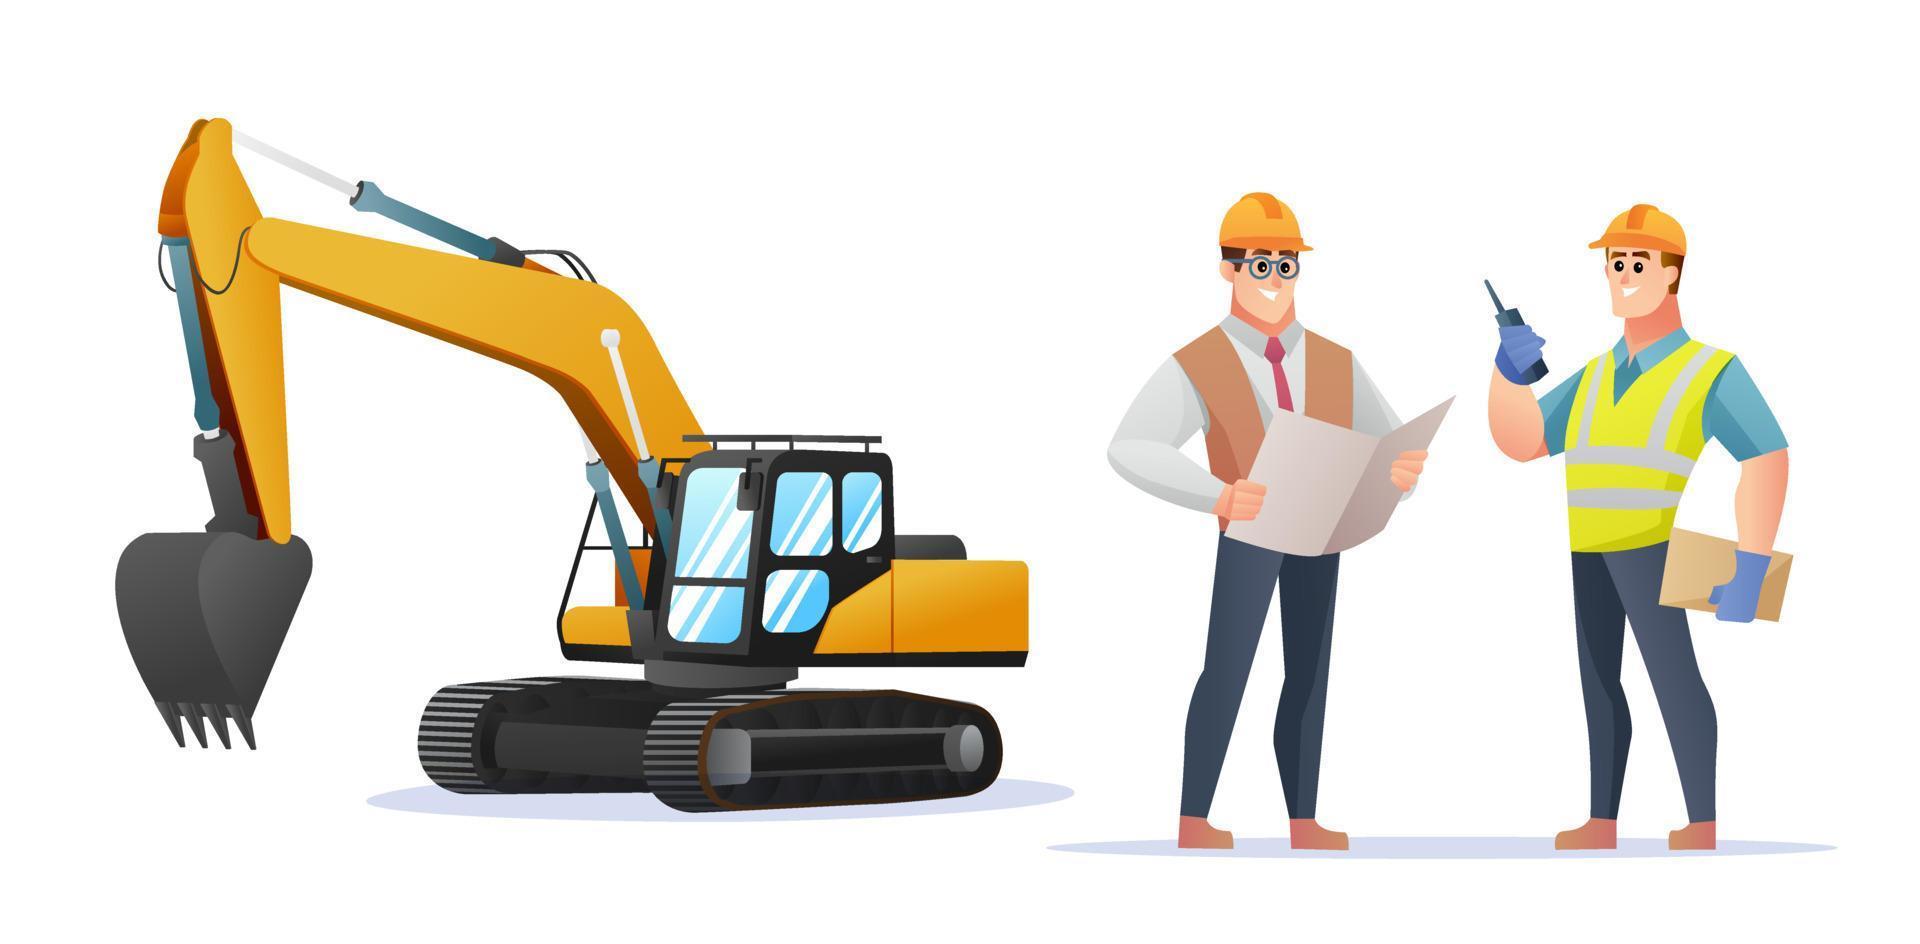 Construction foreman and engineer character with excavator illustration vector